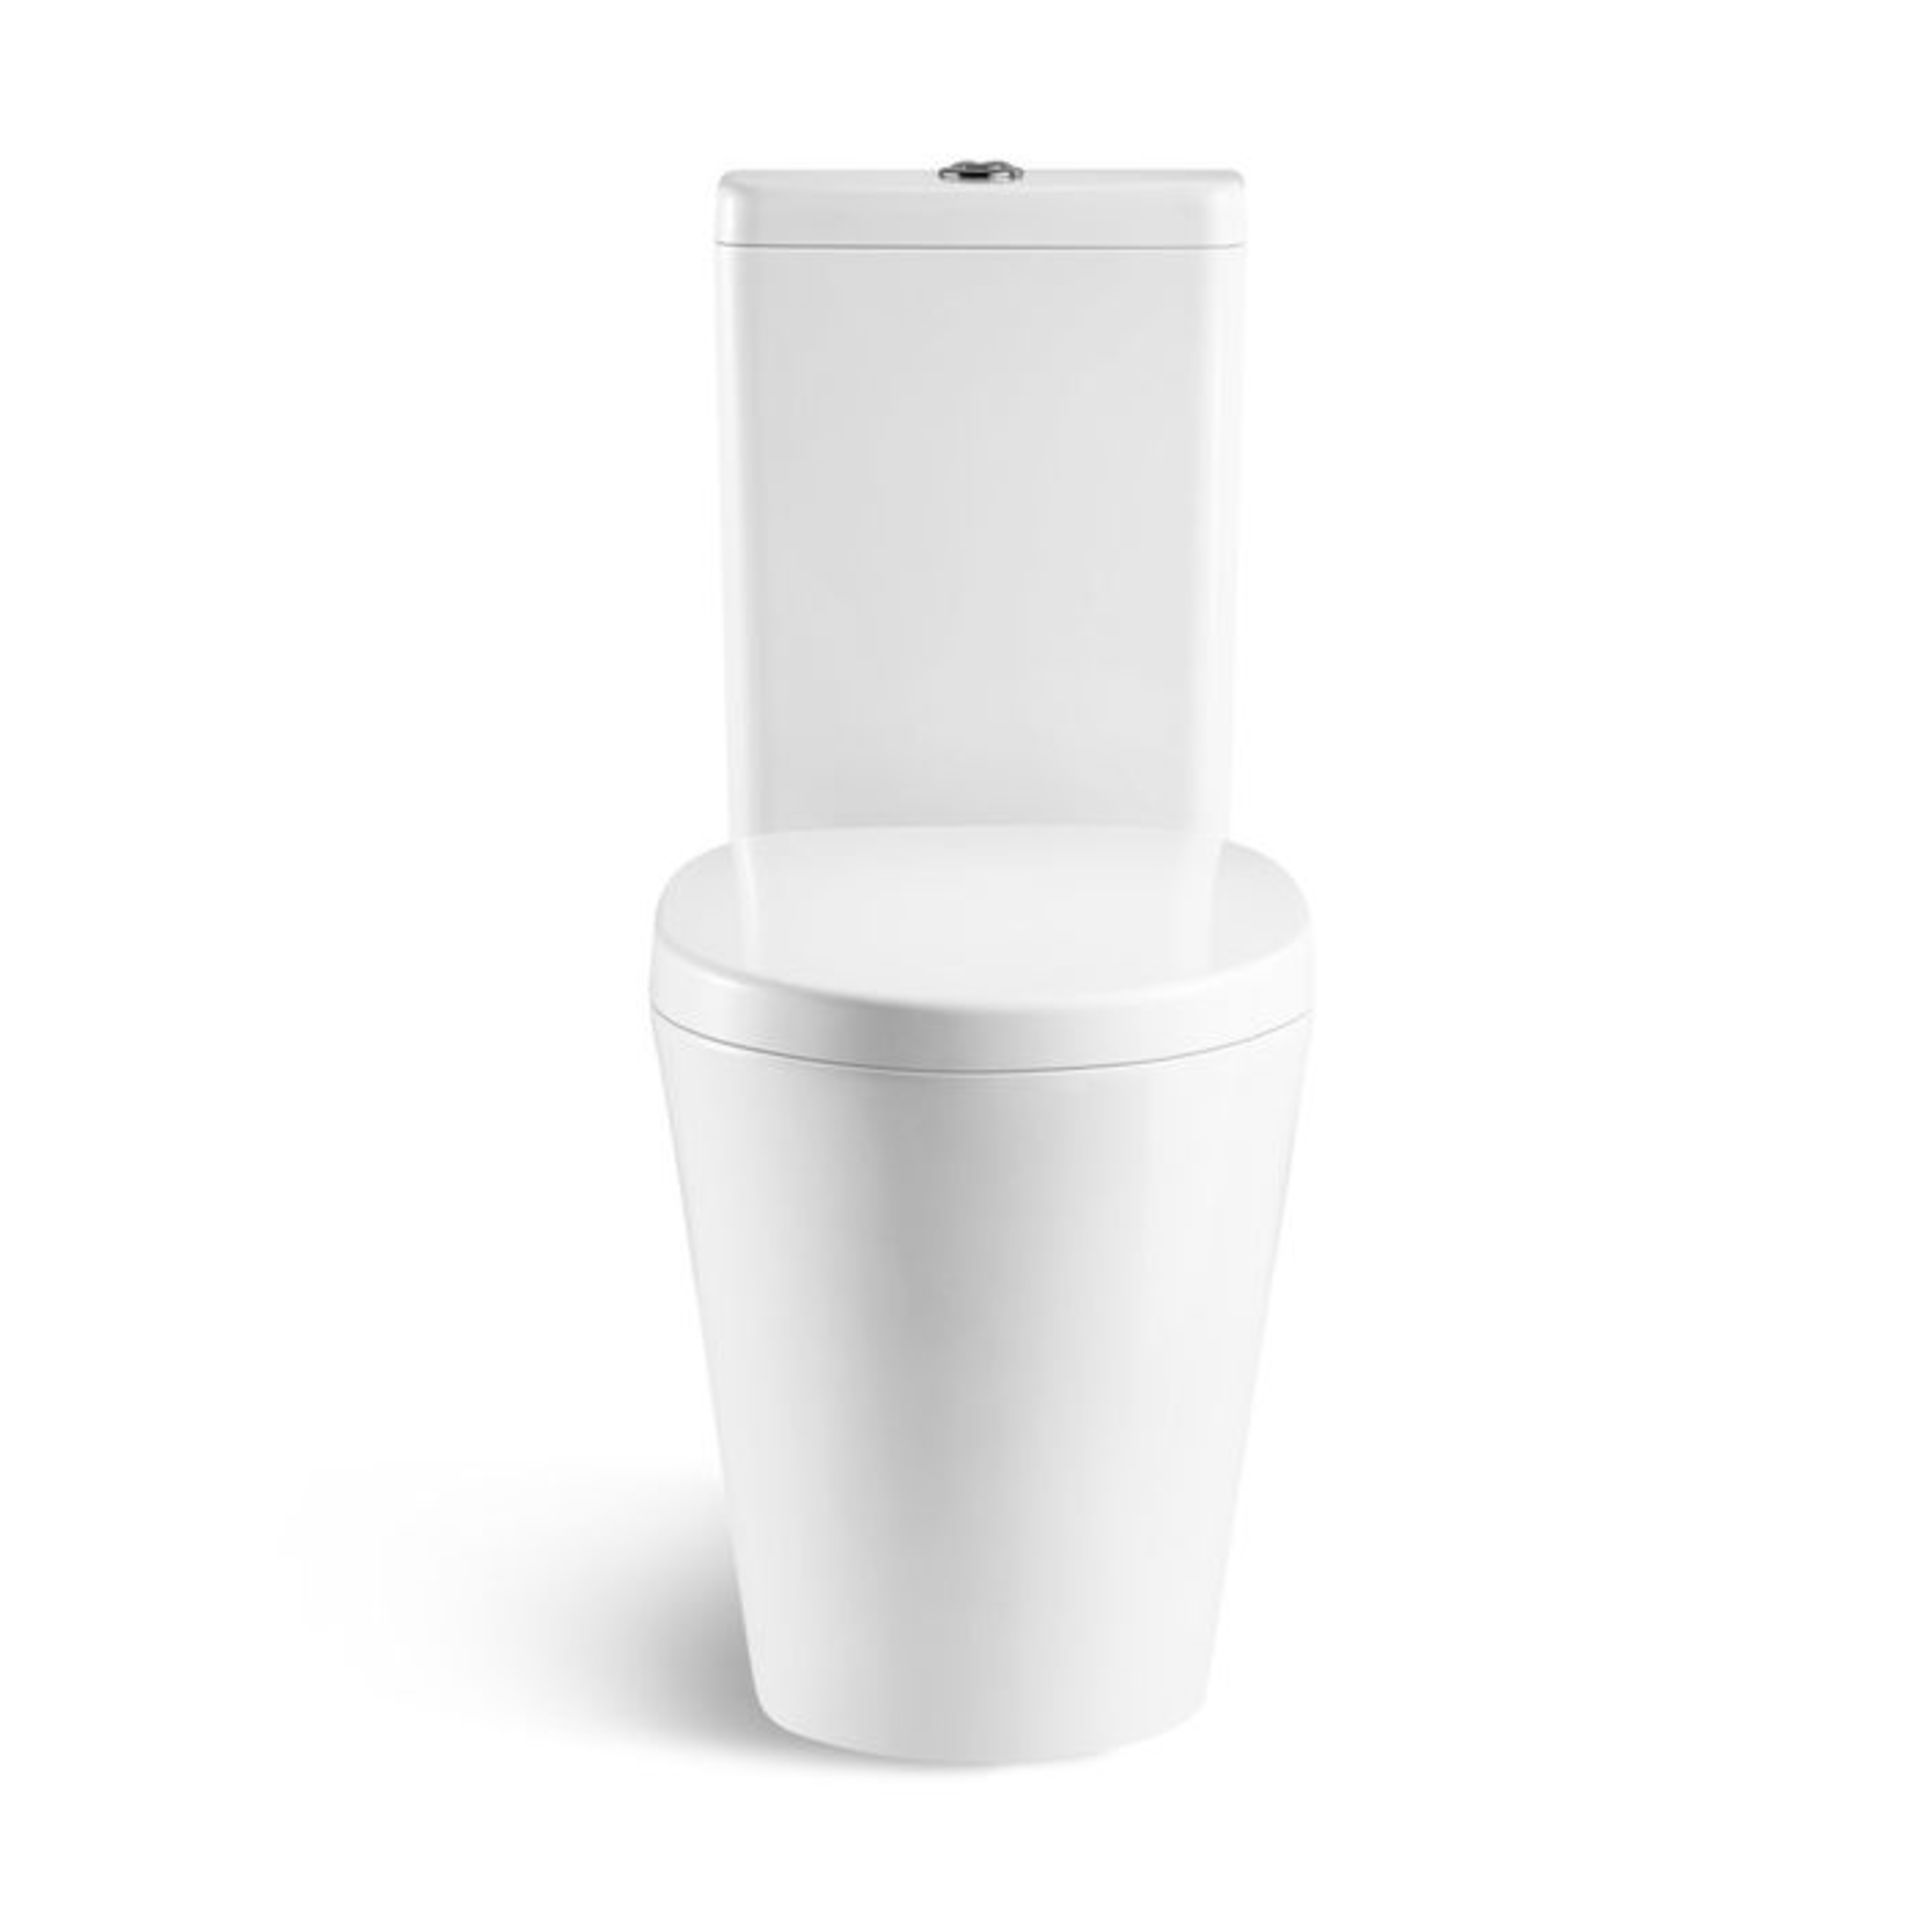 (MT54) Albi Close Coupled Toilet & Cistern inc Soft Close Seat This innovative toilet is the - Image 3 of 4